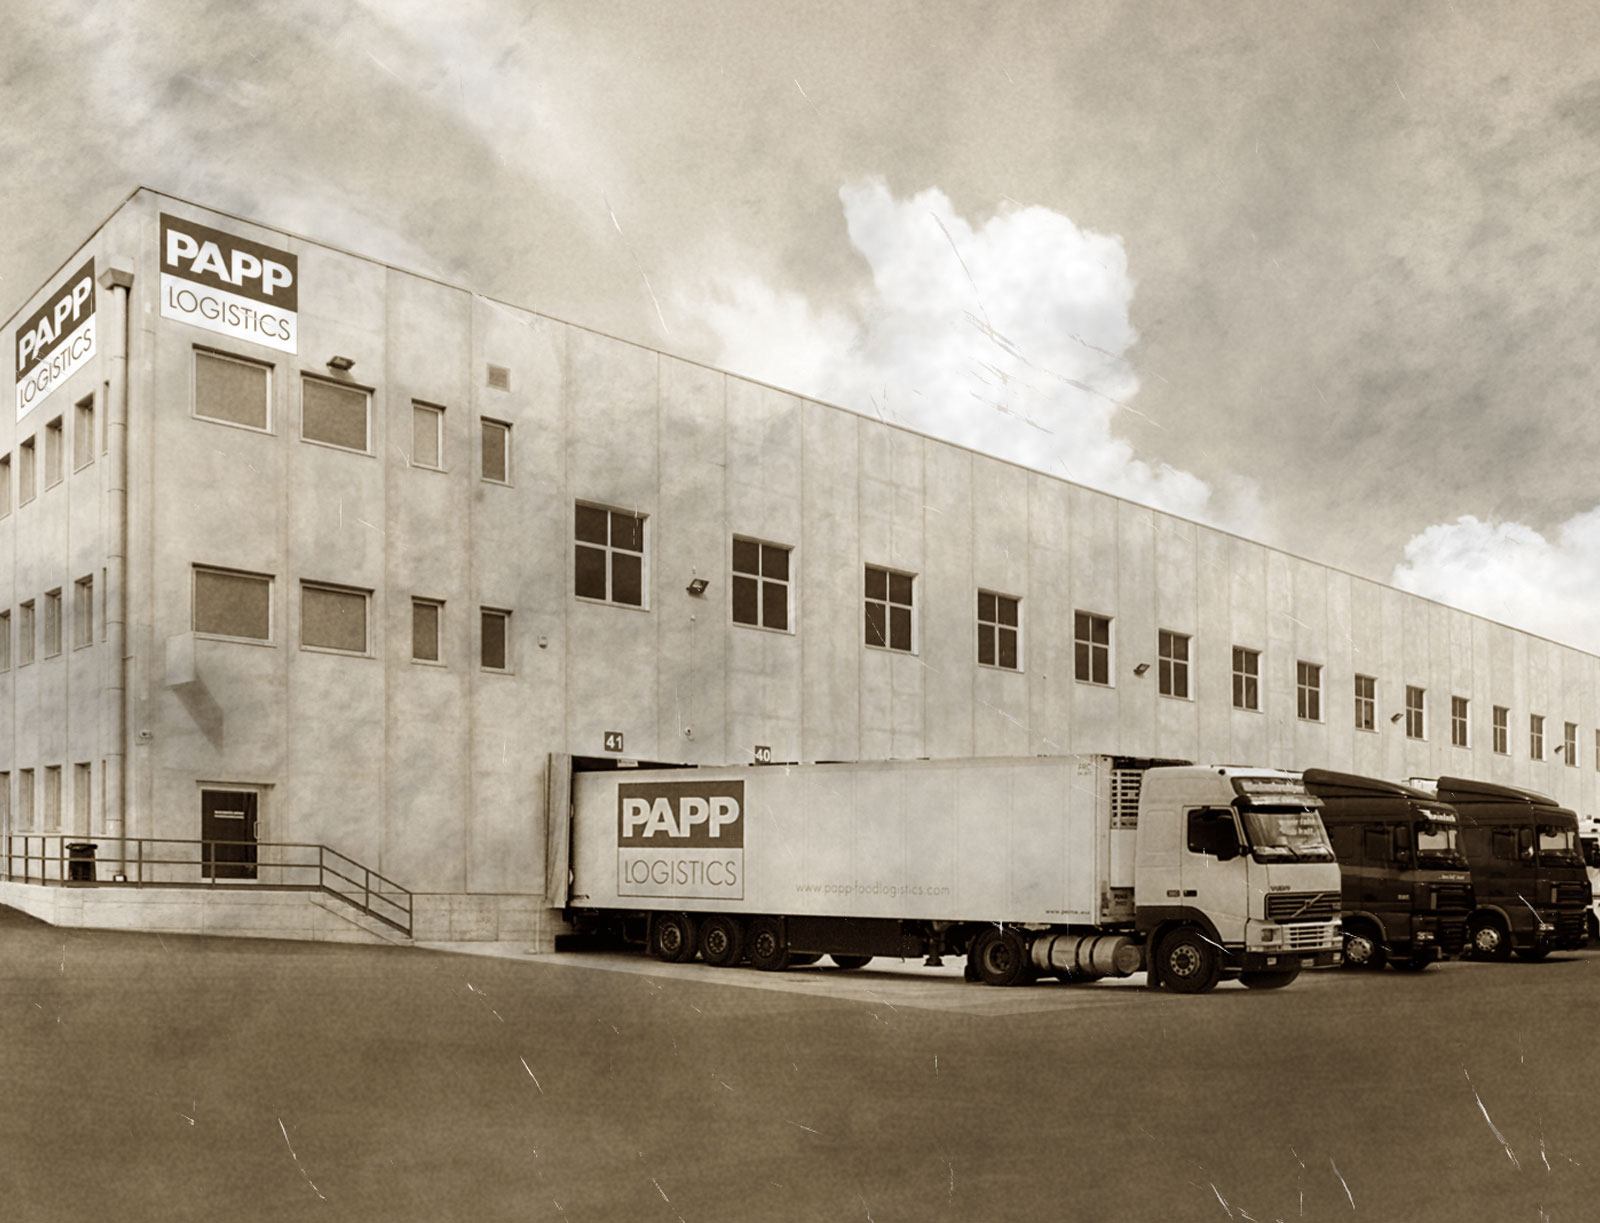 Papp Italia becomes a wholly owned subsidiary of Dachser